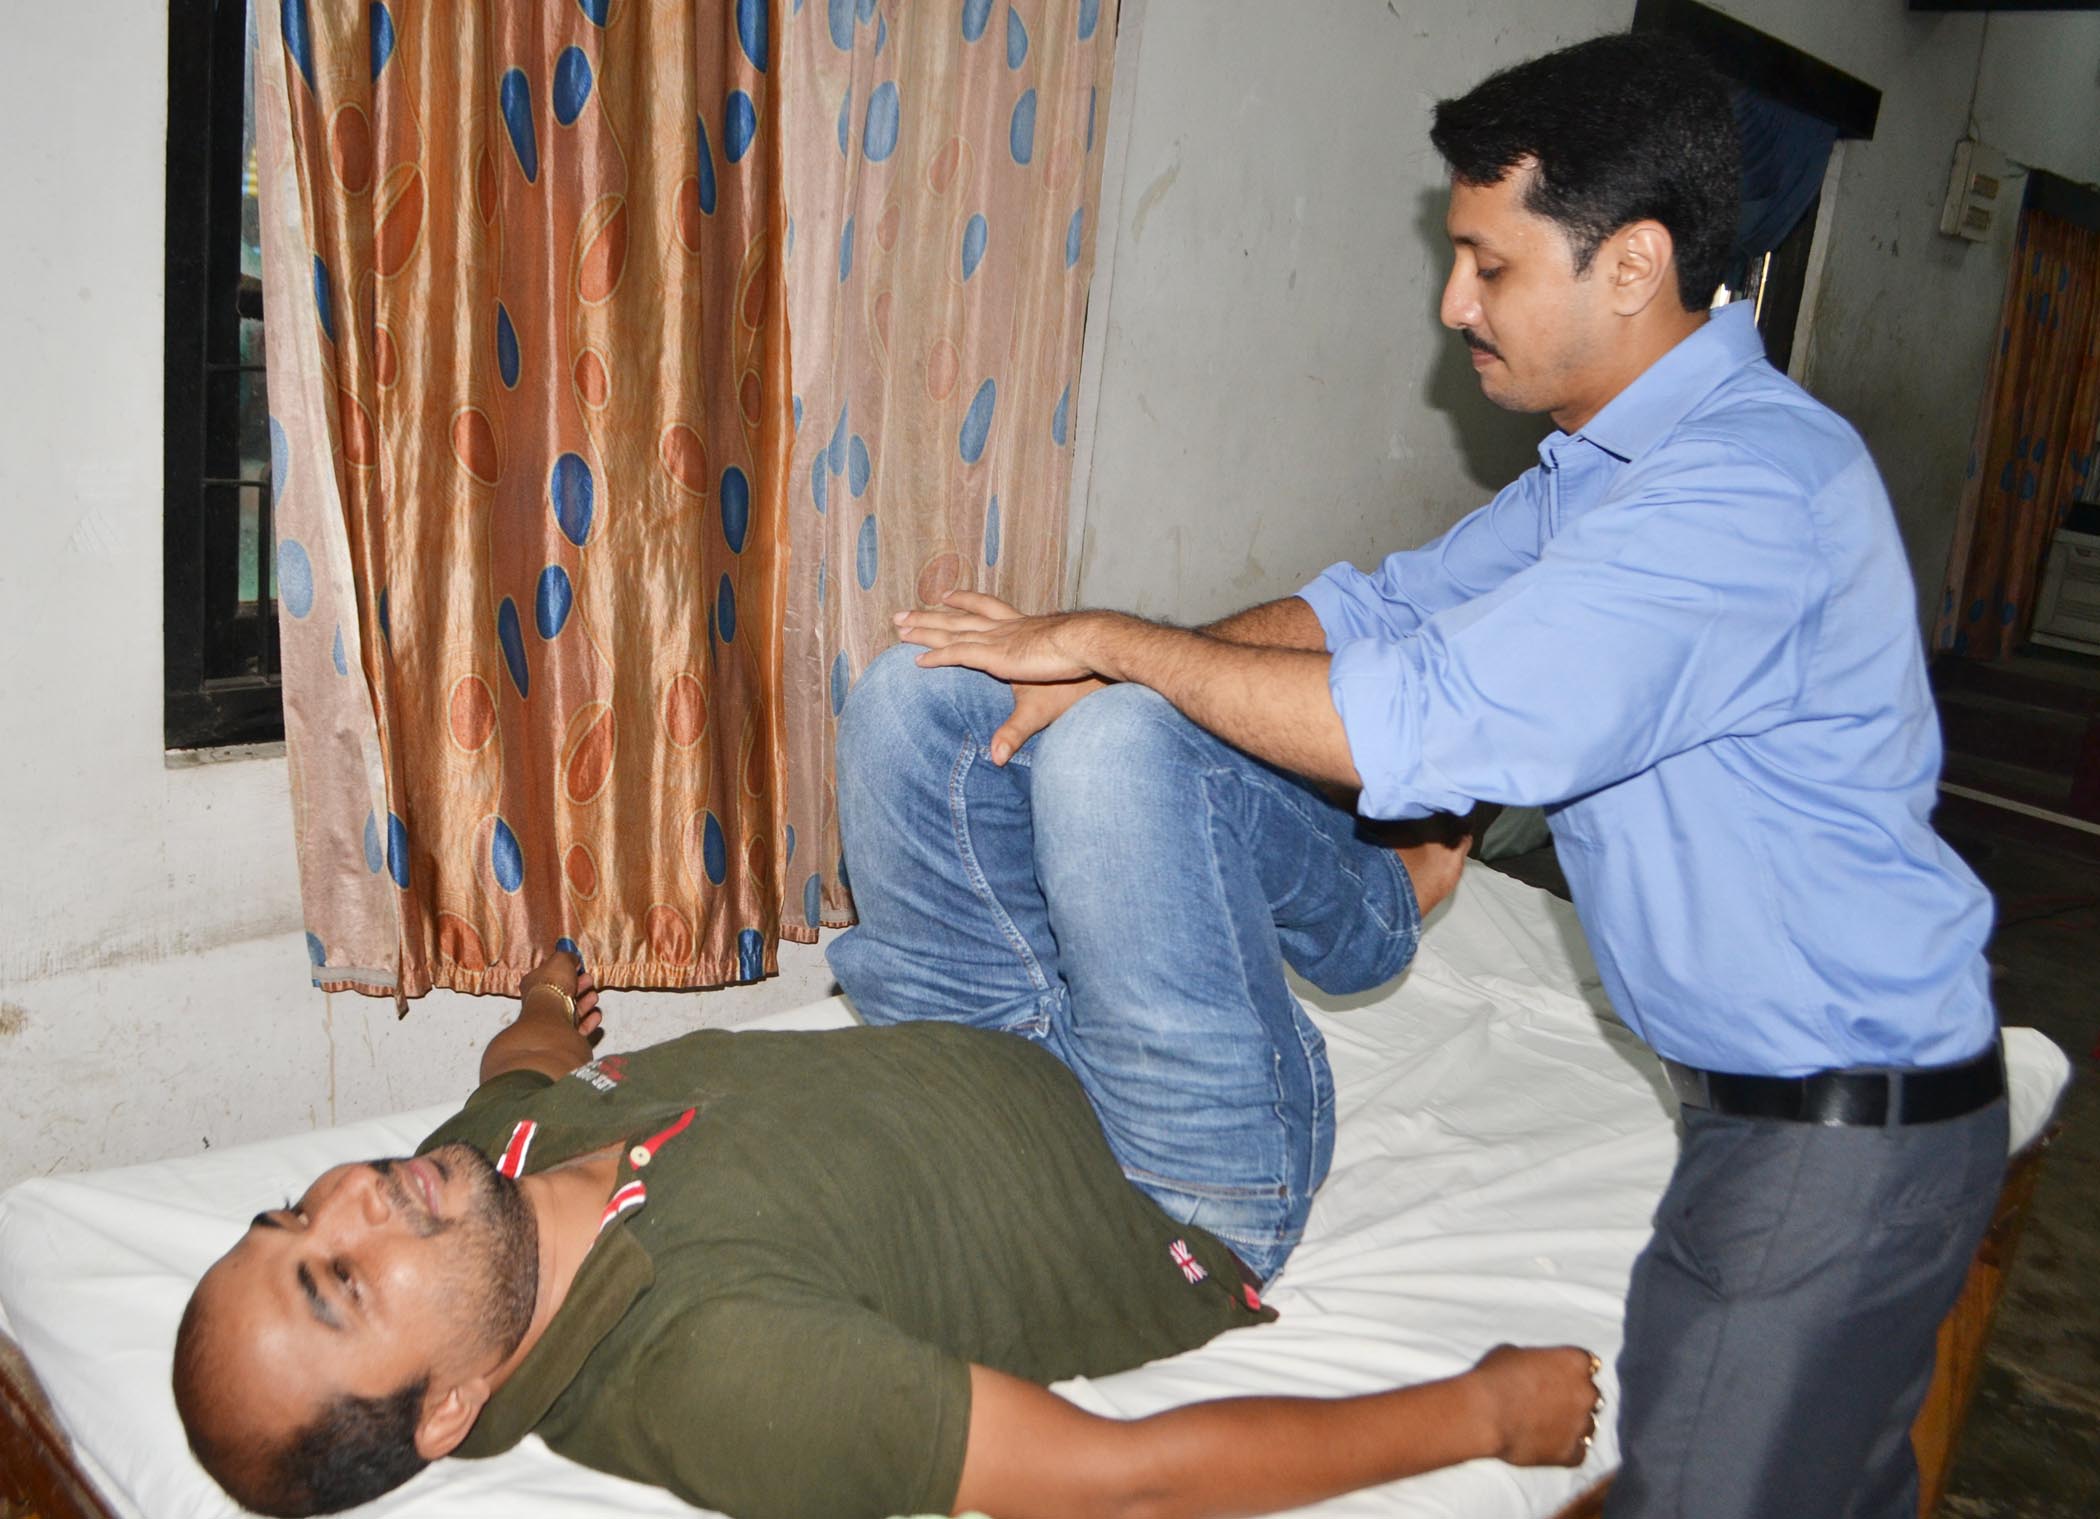 physiotherapy-camp-concludes-at-press-club-assam-times